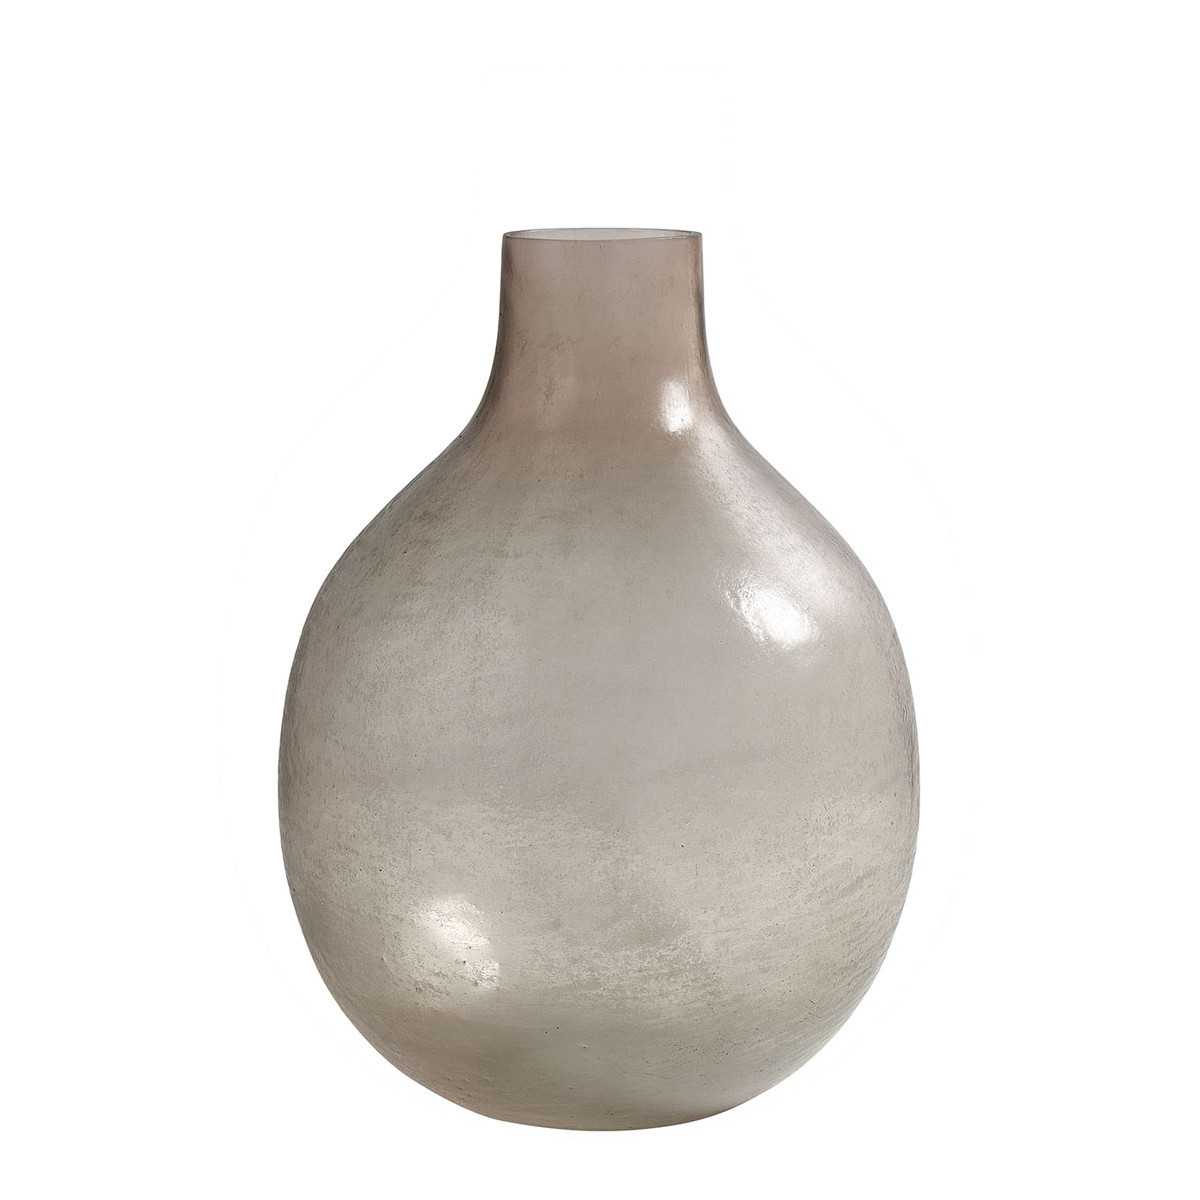 INTERIEUR- DECORATION|JEANNE bottle vase in pink frosted glass - Small model - H. 37 cmBLANC D'IVOIREVases